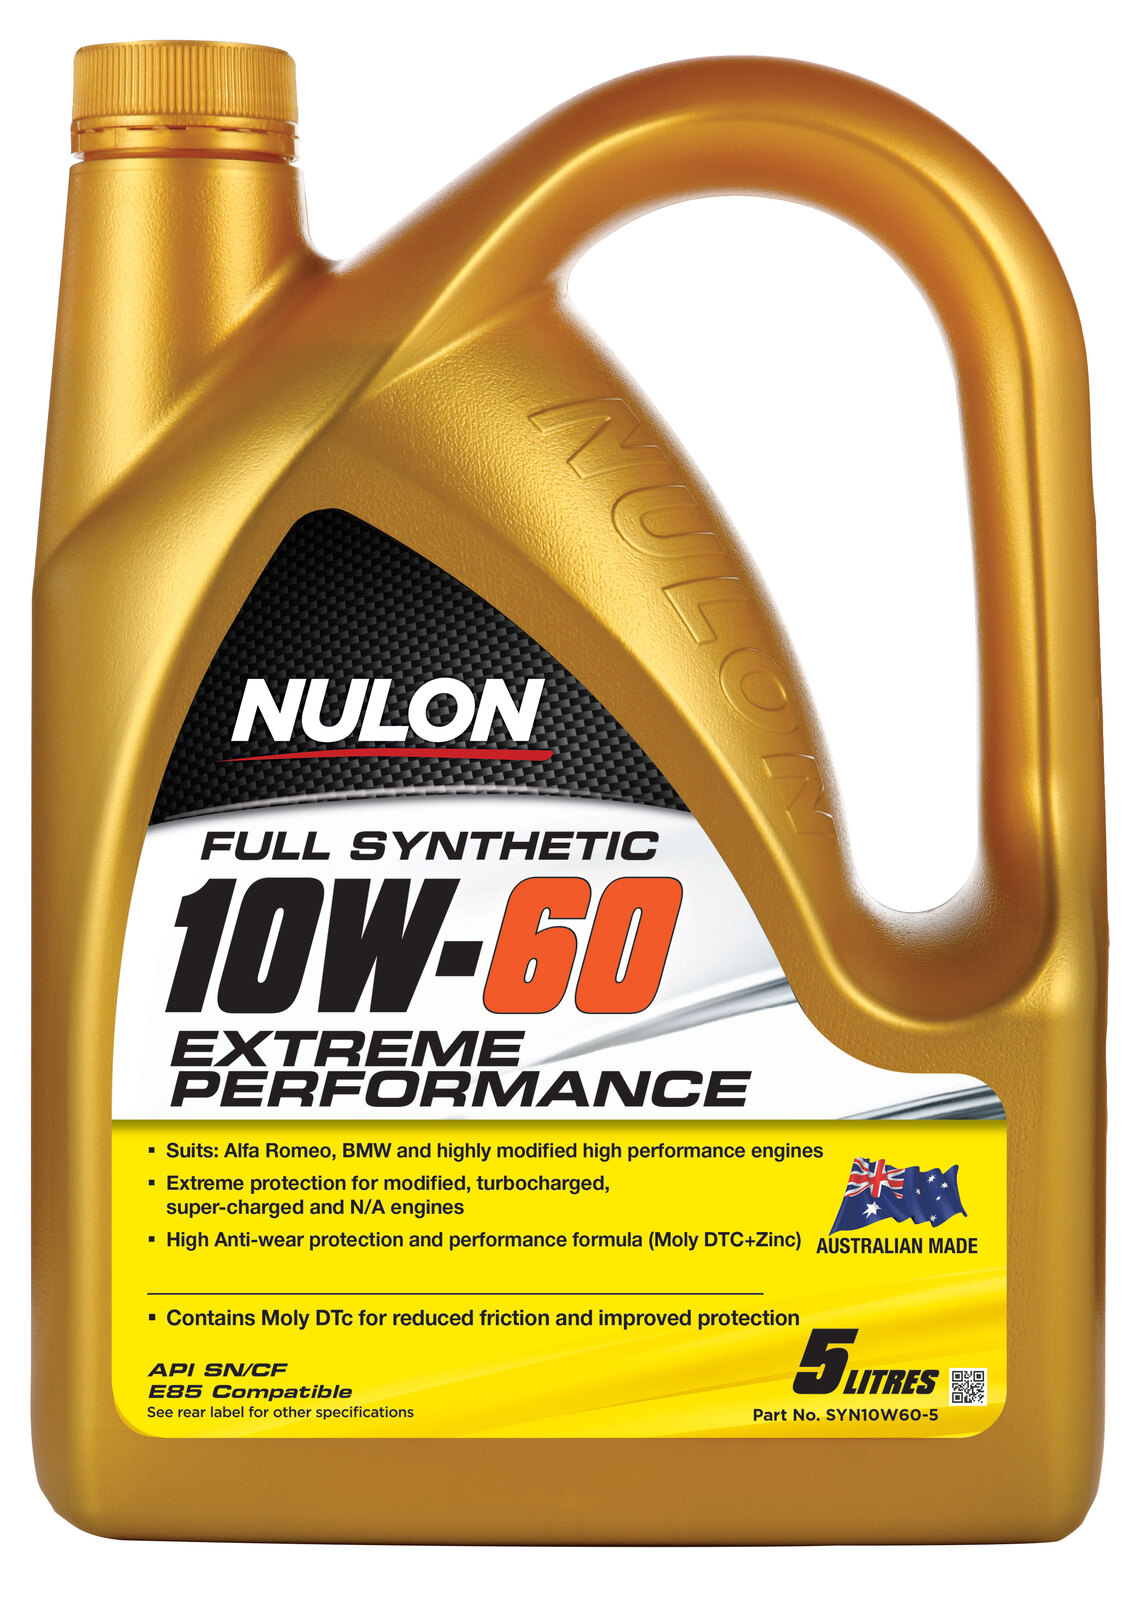 NULON Full Synthetic 10W60 Extreme Engine Oil, Each